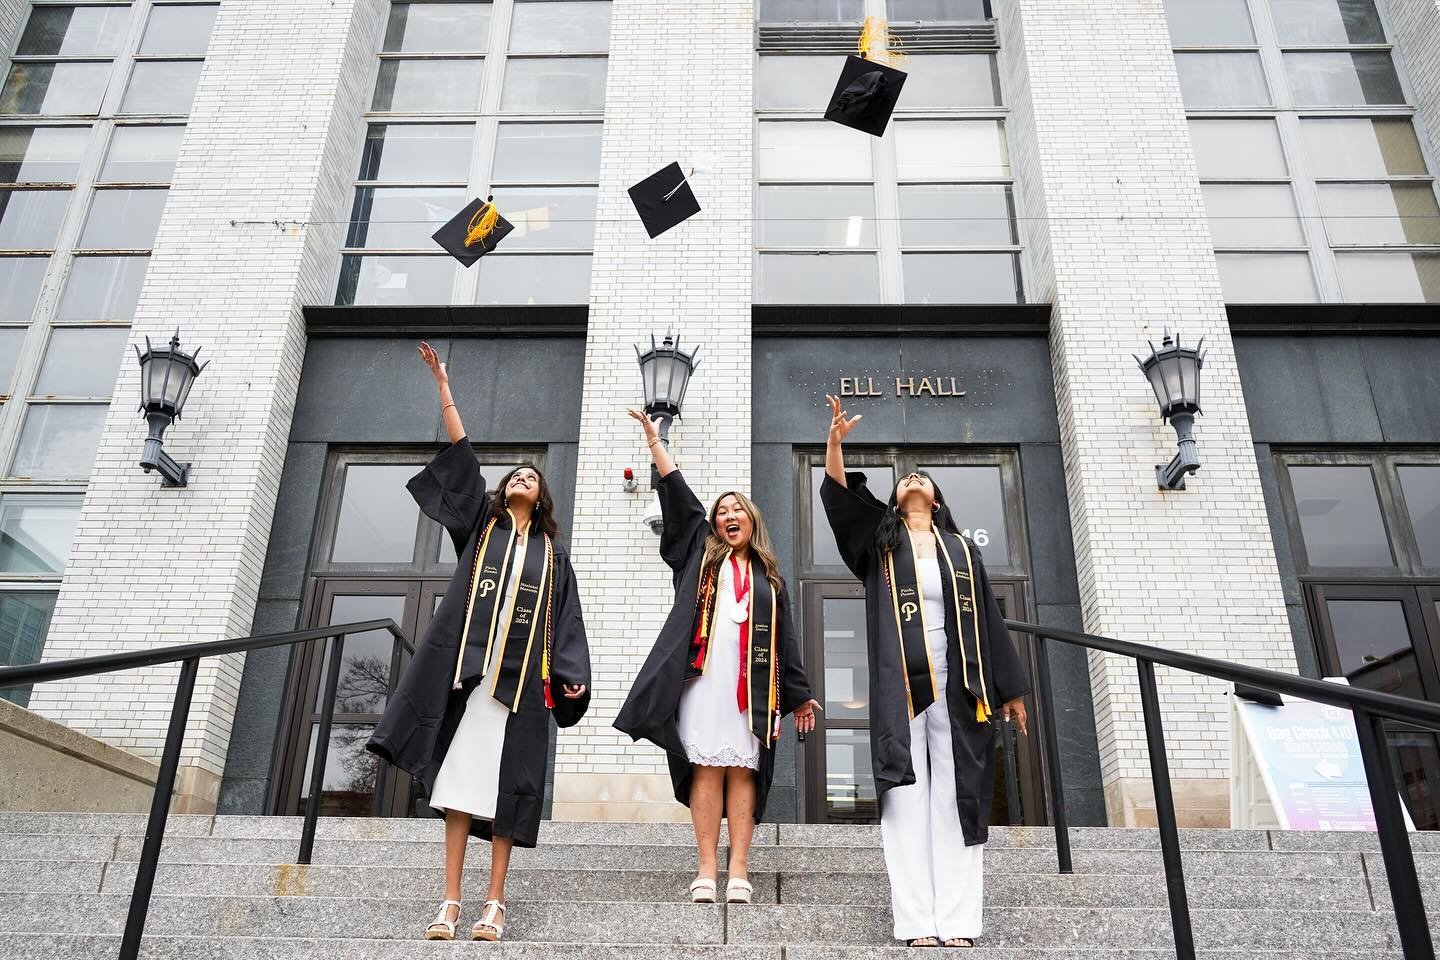 Last weekend marked a truly special moment as we celebrated the GRADUATION of our three beautiful seniors! ❤️🥂

To our lovely seniors,

your tireless dedication, hard work, outstanding talent, and endless amounts of love have left such a profound im